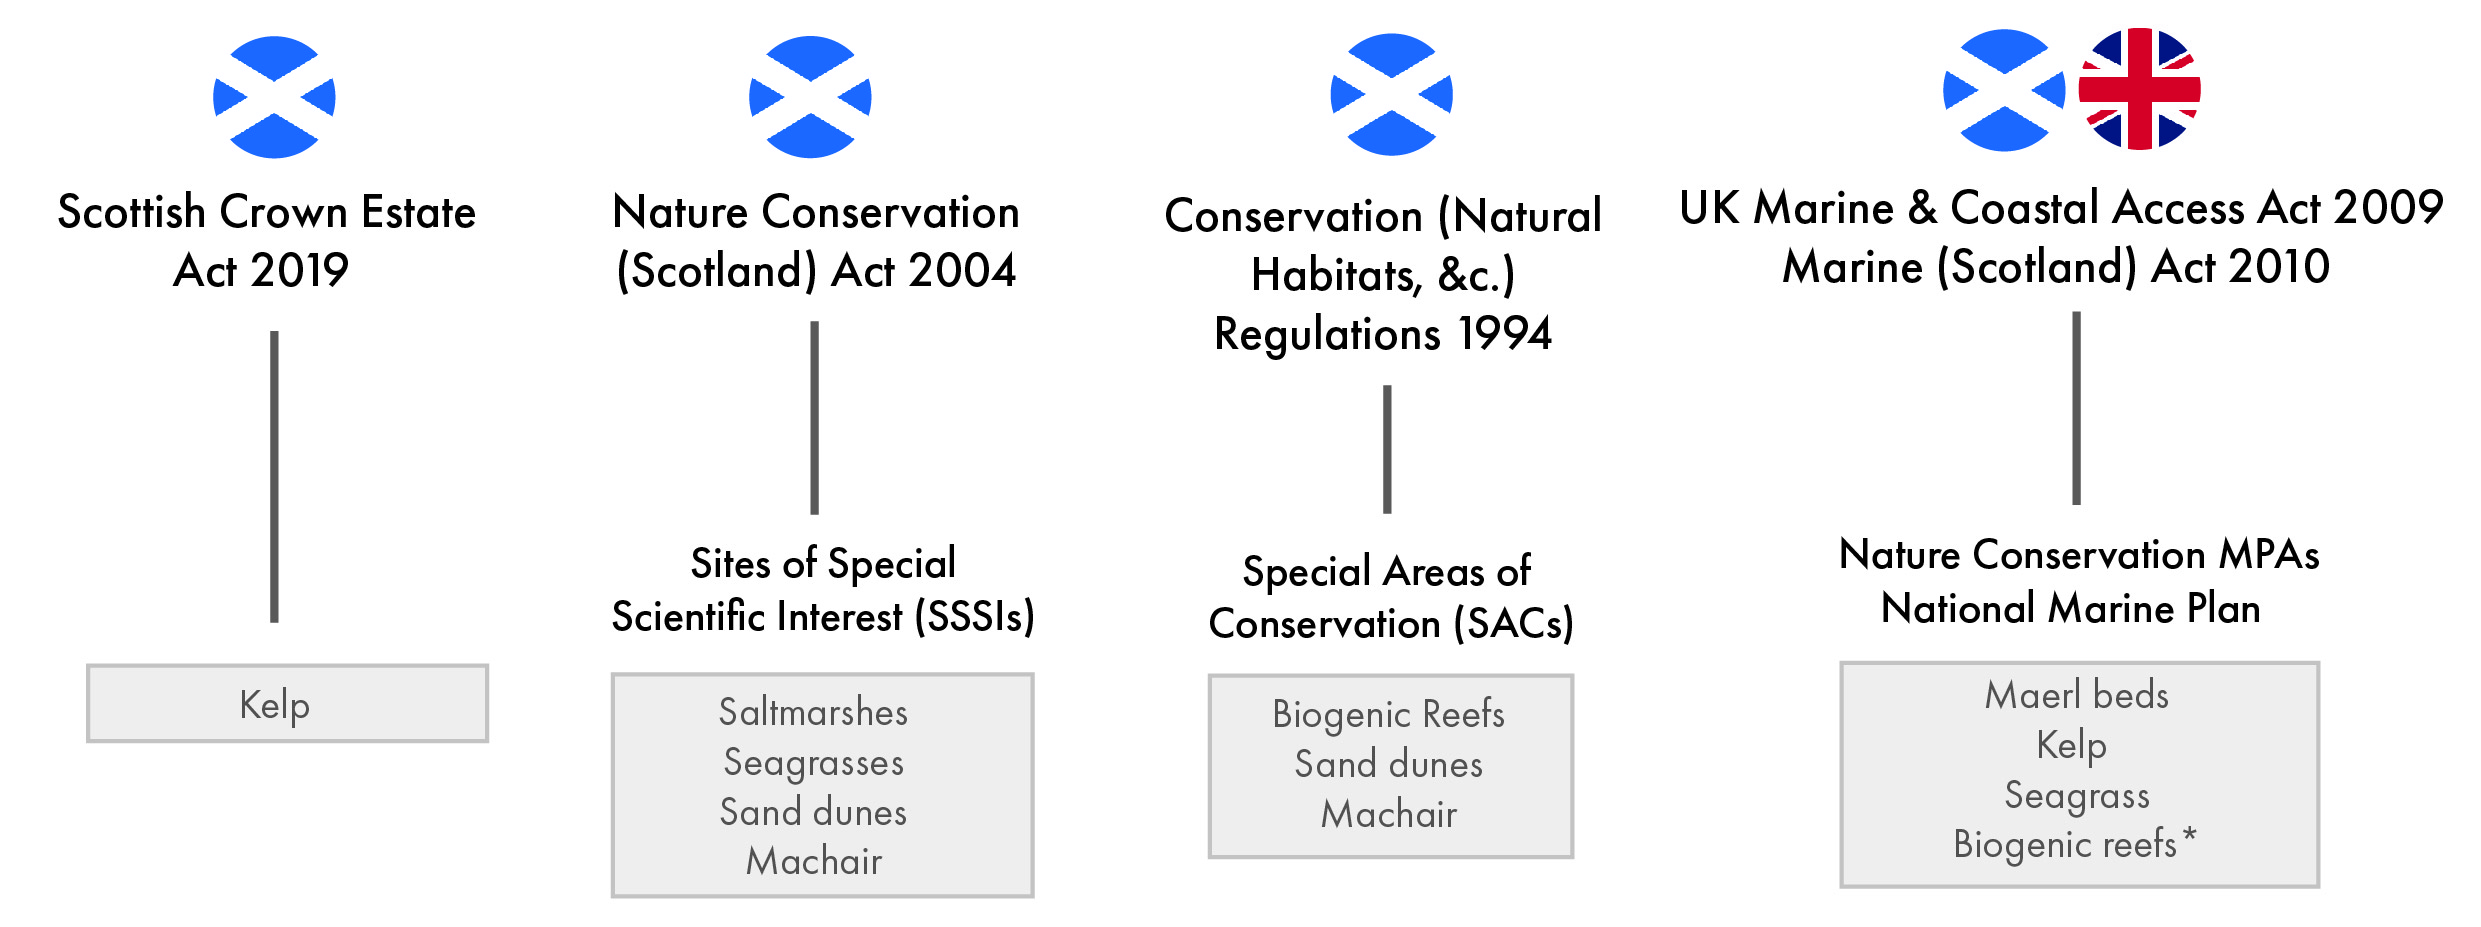 Diagram showing the key acts empowering Scottish Ministers to protect blue carbon species and habitats, on the basis of their contributions to Scotland's biodiversity